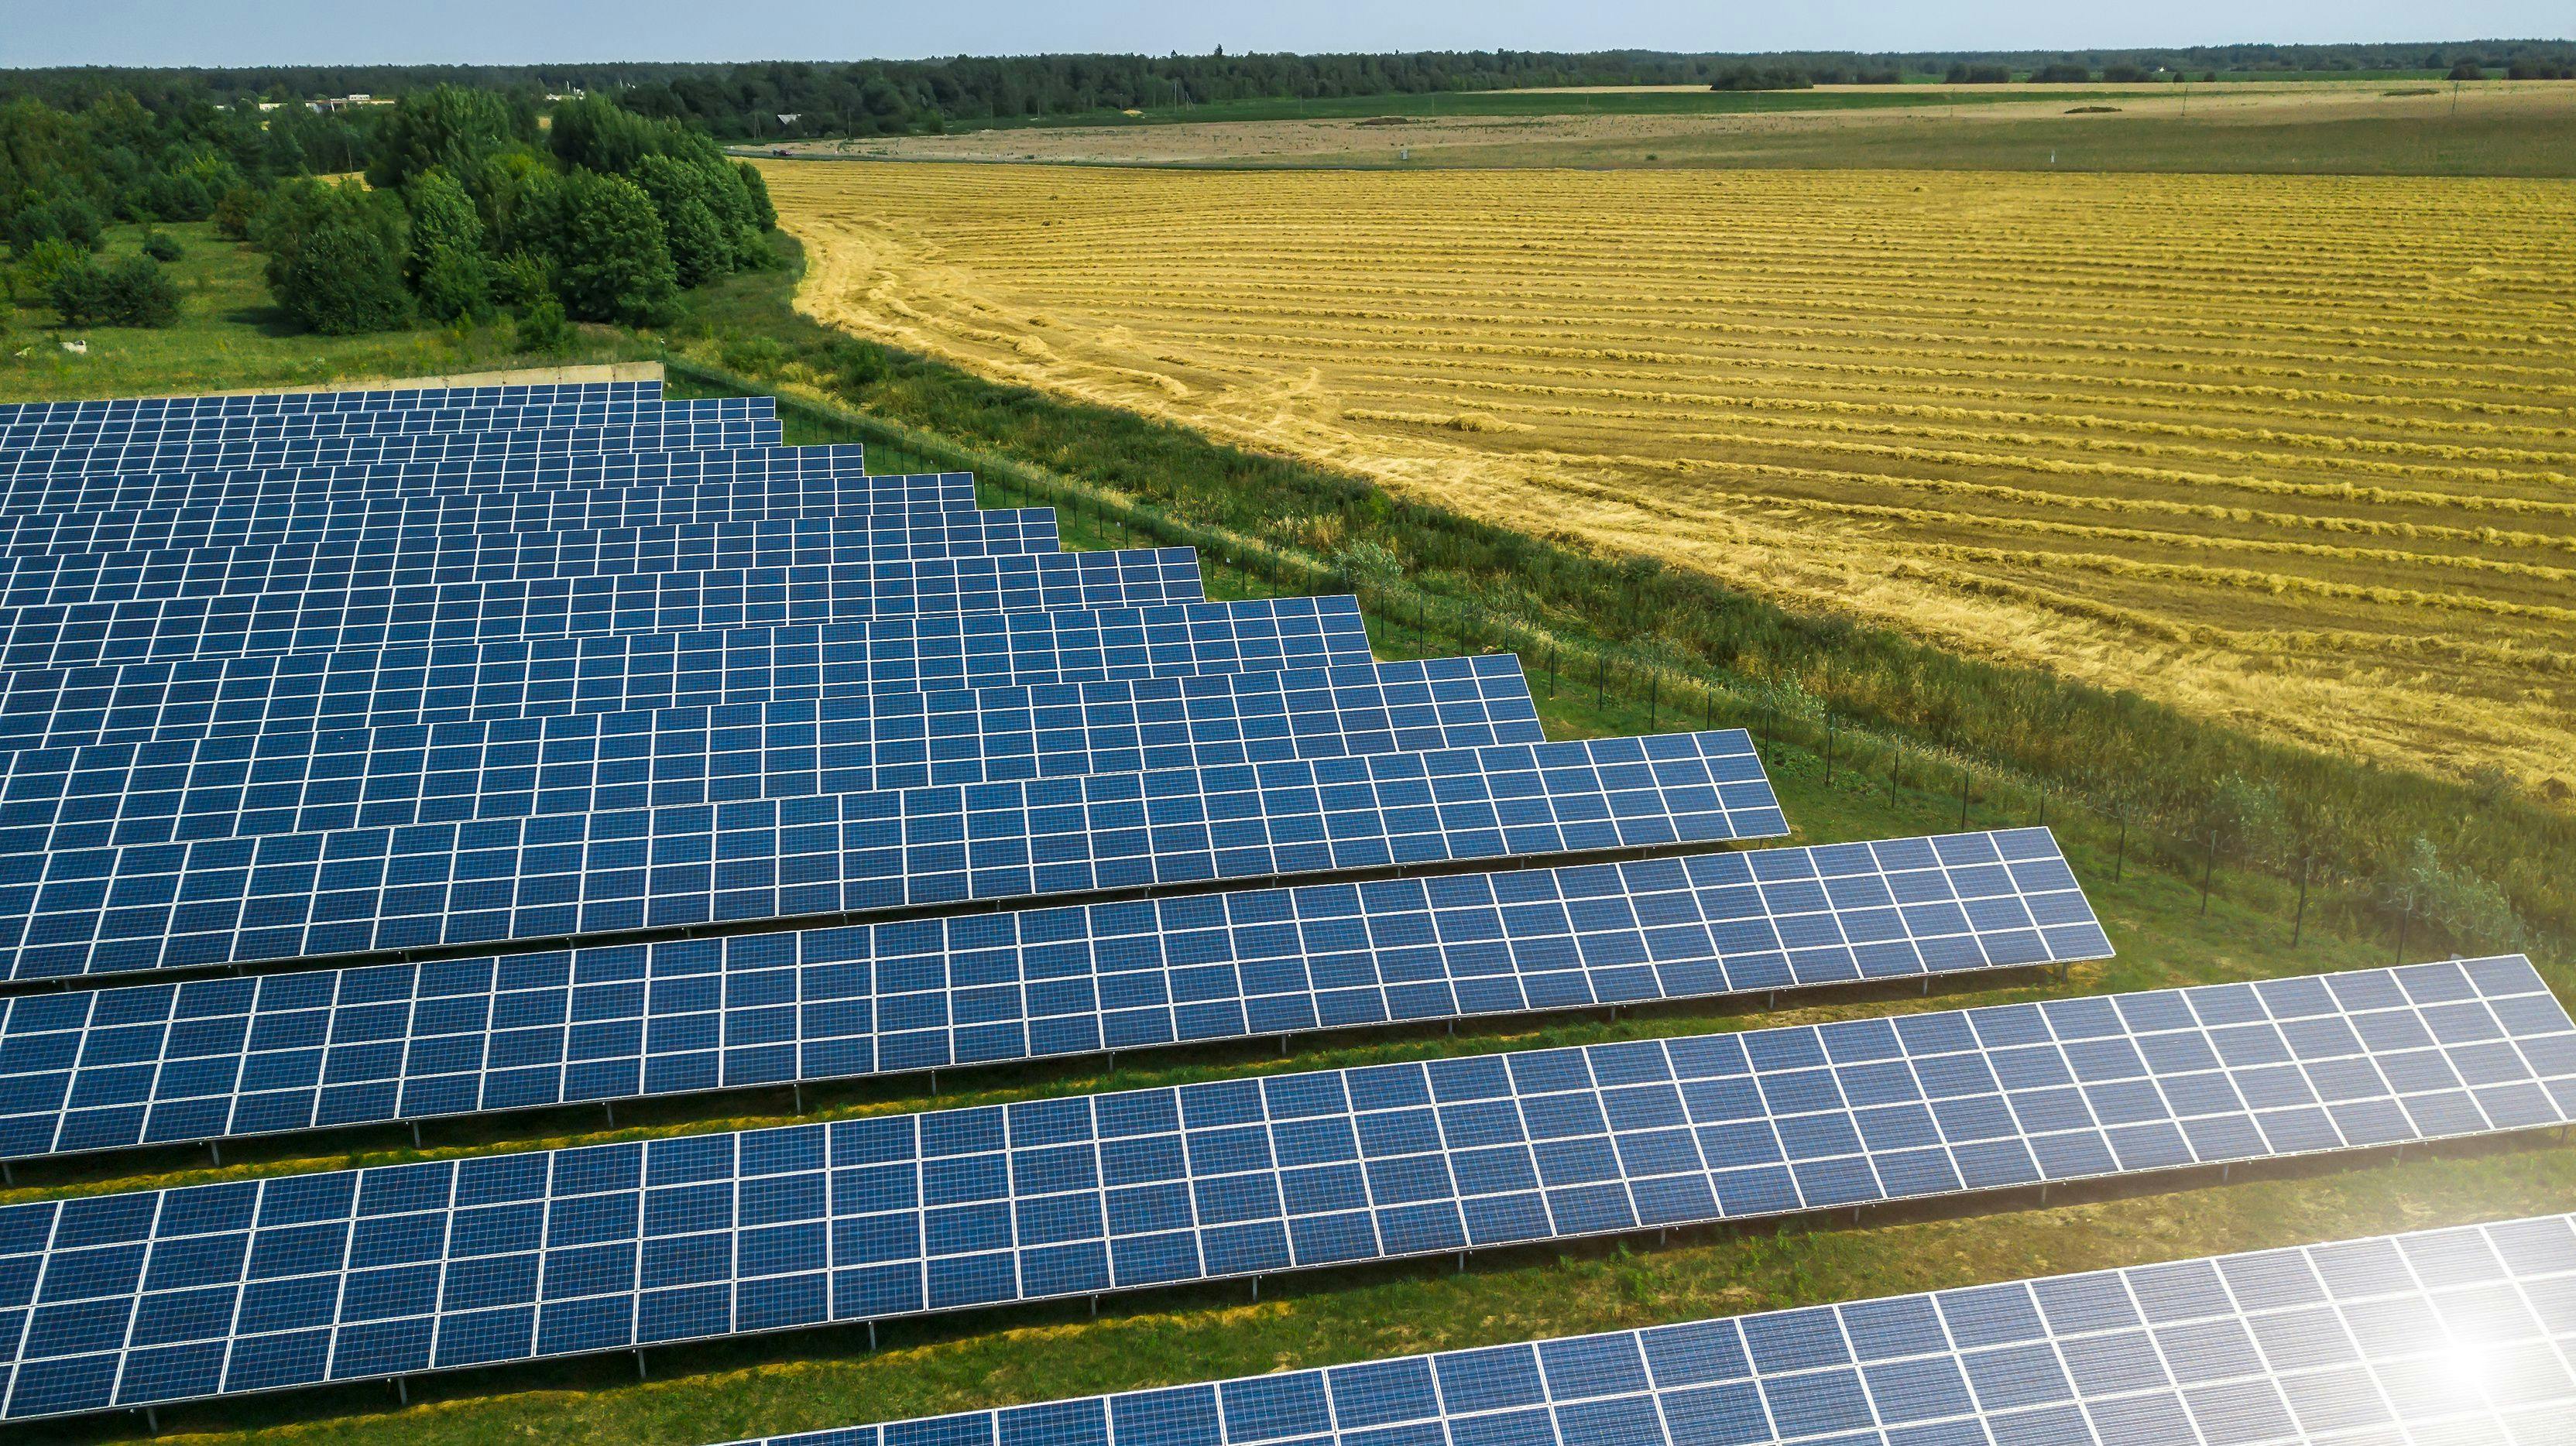 J&J Vision unites operations with a solar farm to cover electricity consumption